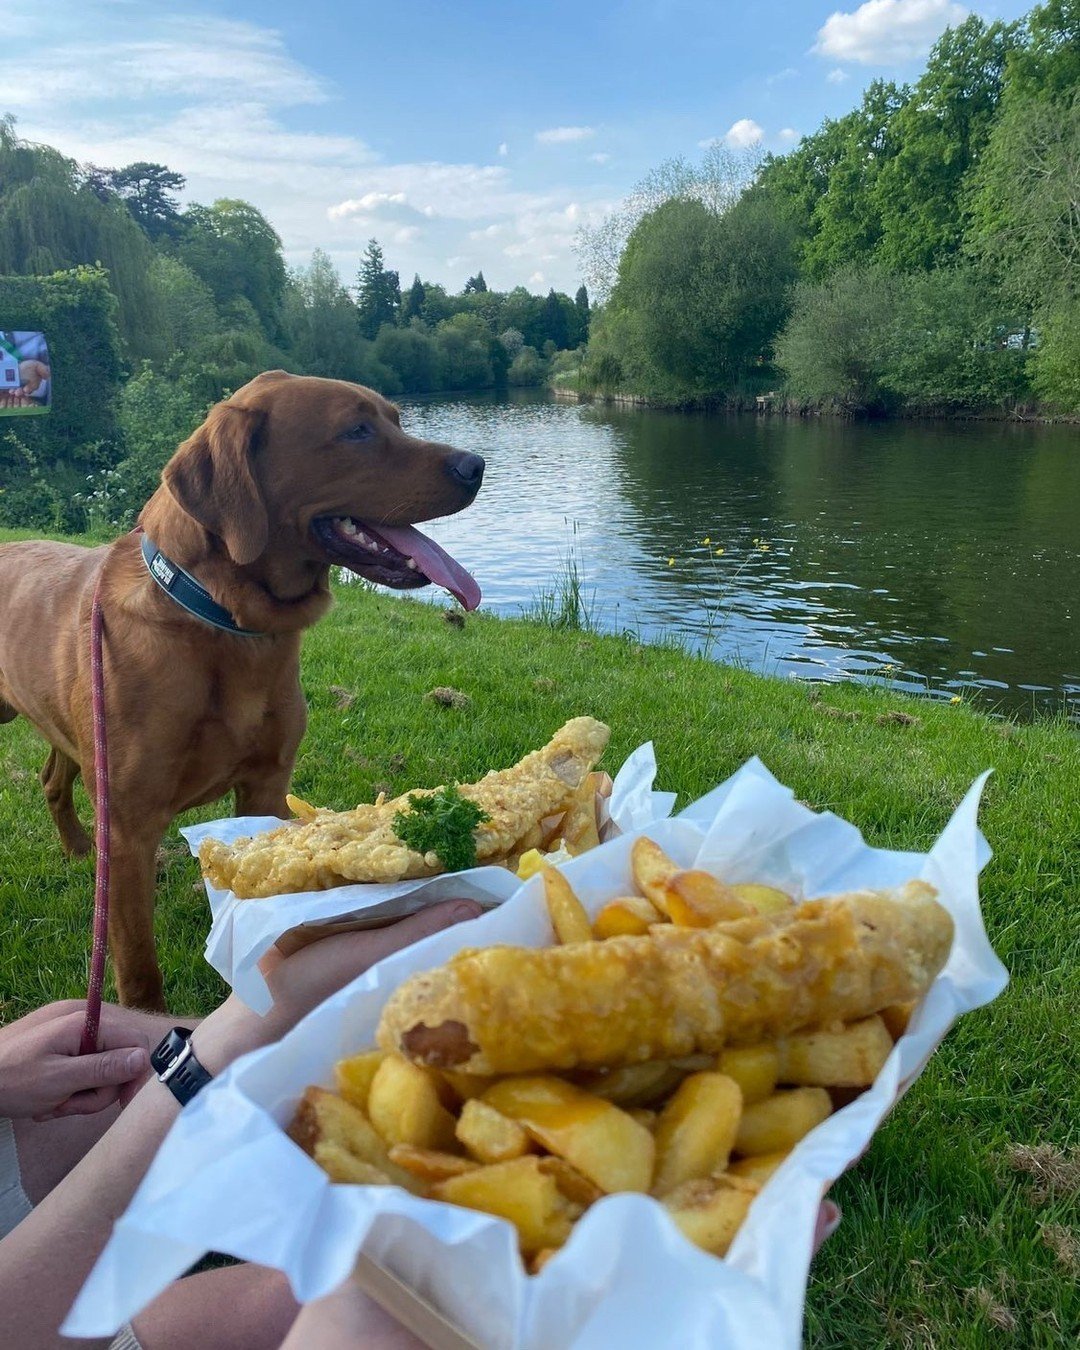 Throwing it back to last week's sun-soaked evening at the Pengwarn Boat Club ☀️

Take a look at some photos our customers captured. Remember to tag us in your Fish Heads content! 

#FishHeads #FoodTruck #Shrewsbury #PopUpEvents